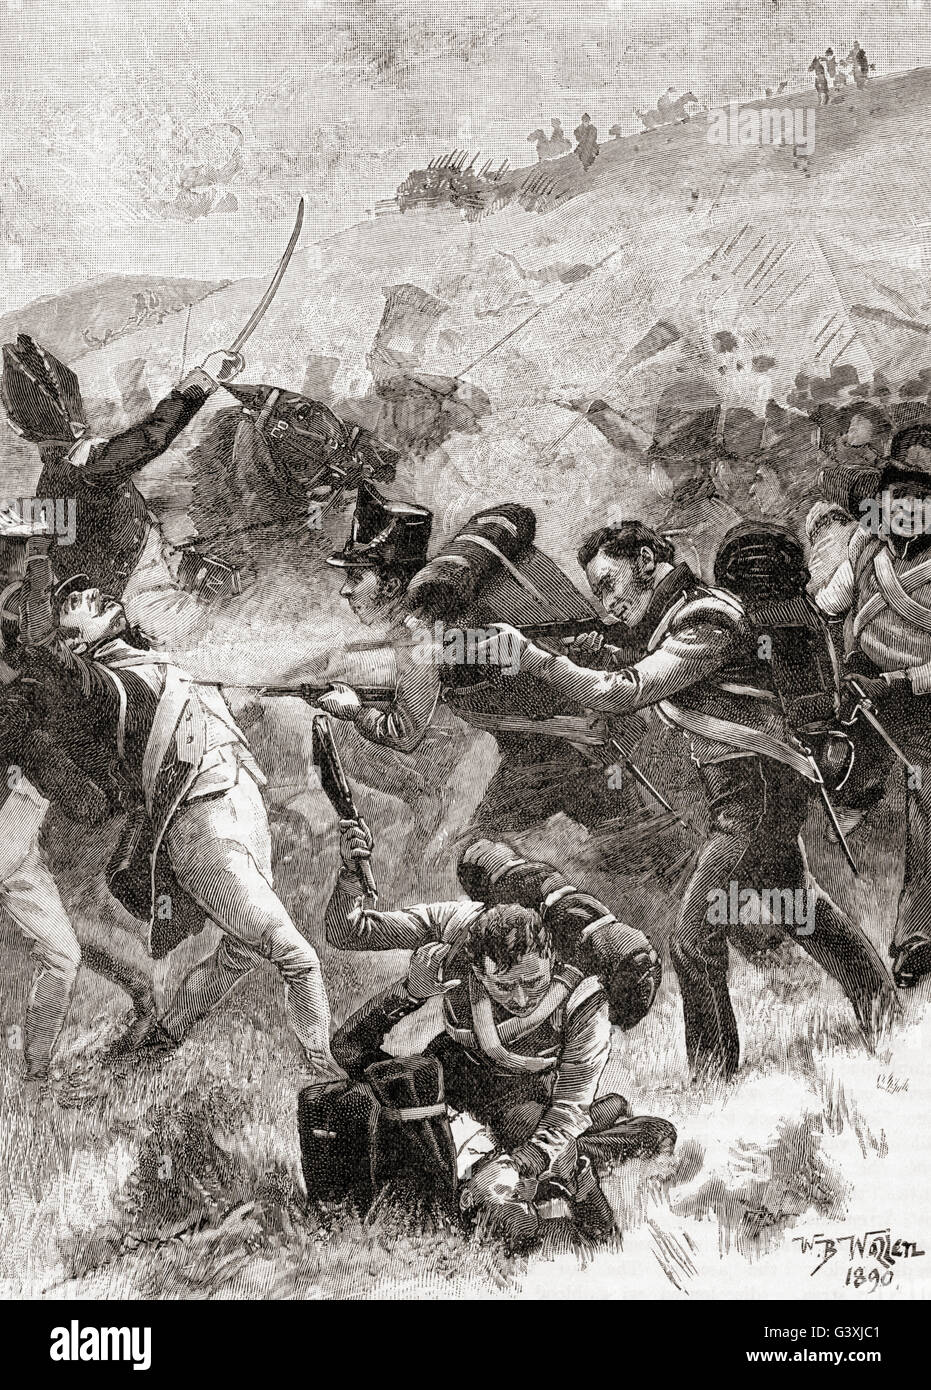 British fusiliers at The Battle of Albuera, Spain, 16 May 1811, during the Peninsular War. Stock Photo